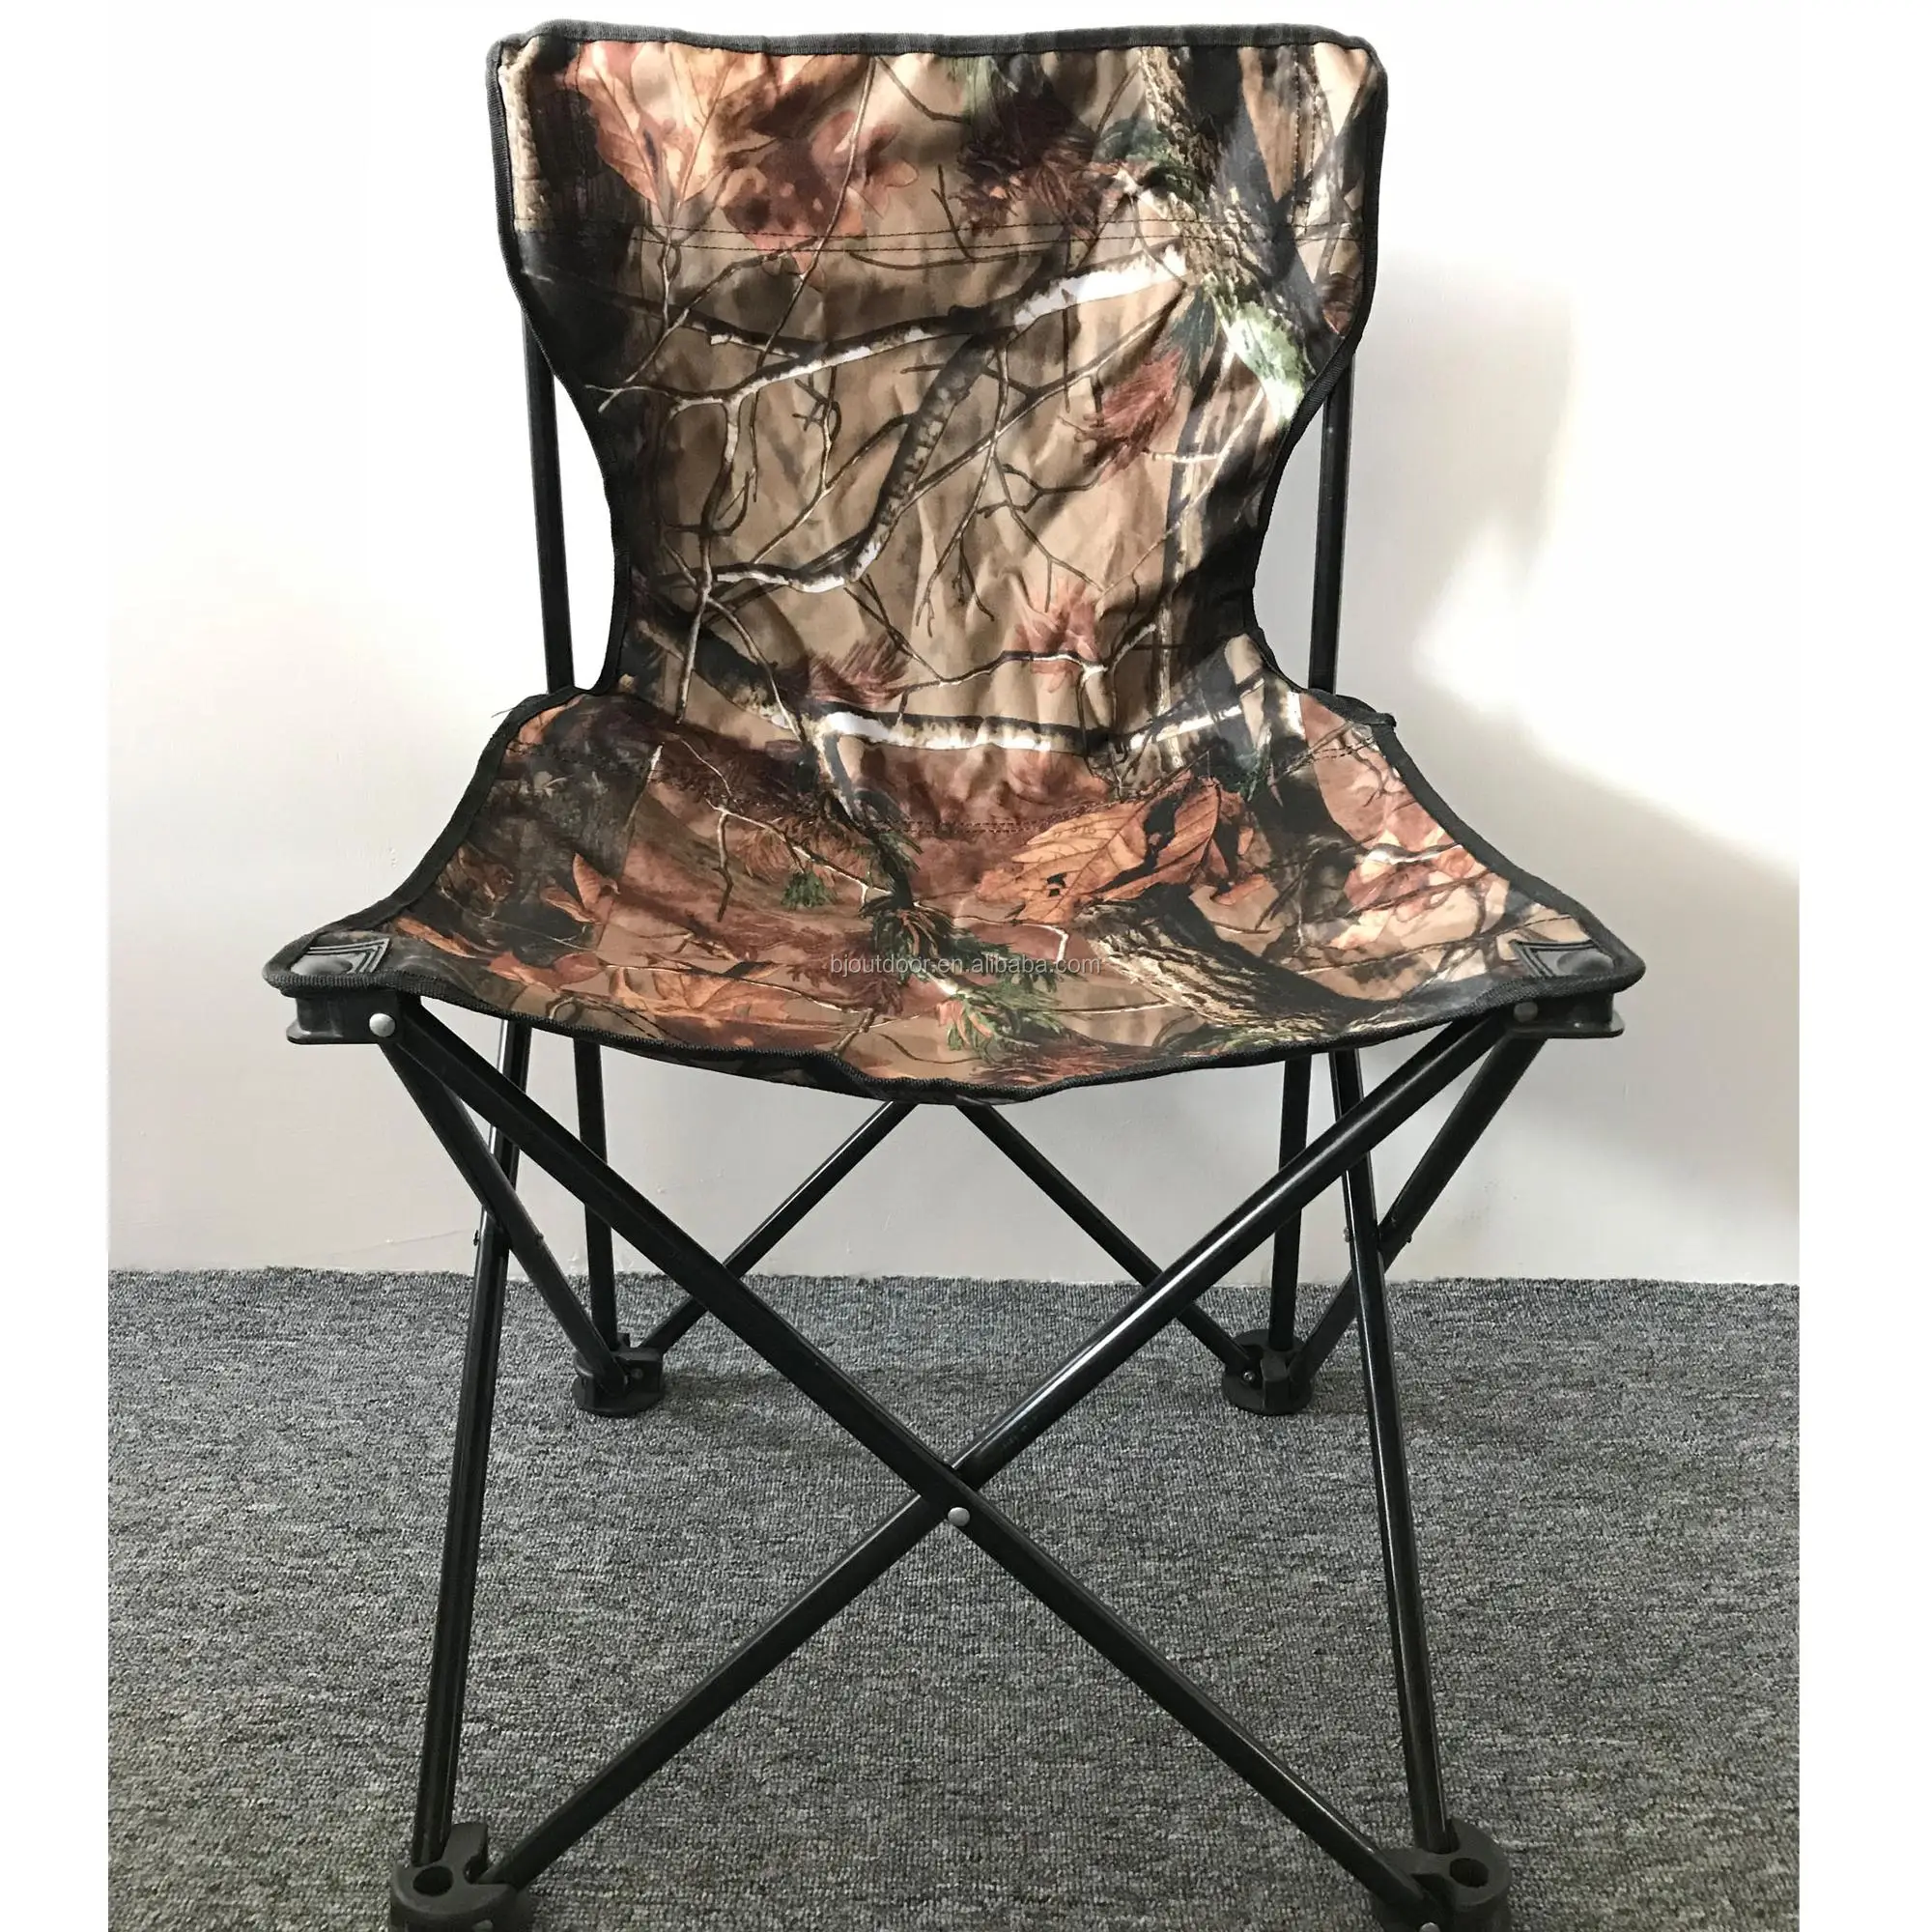 Fishing Camo Chair Folding Chair Without Armrest Camo Folding Camping Chair From Bj Outdoor Buy Fishing Camo Chair